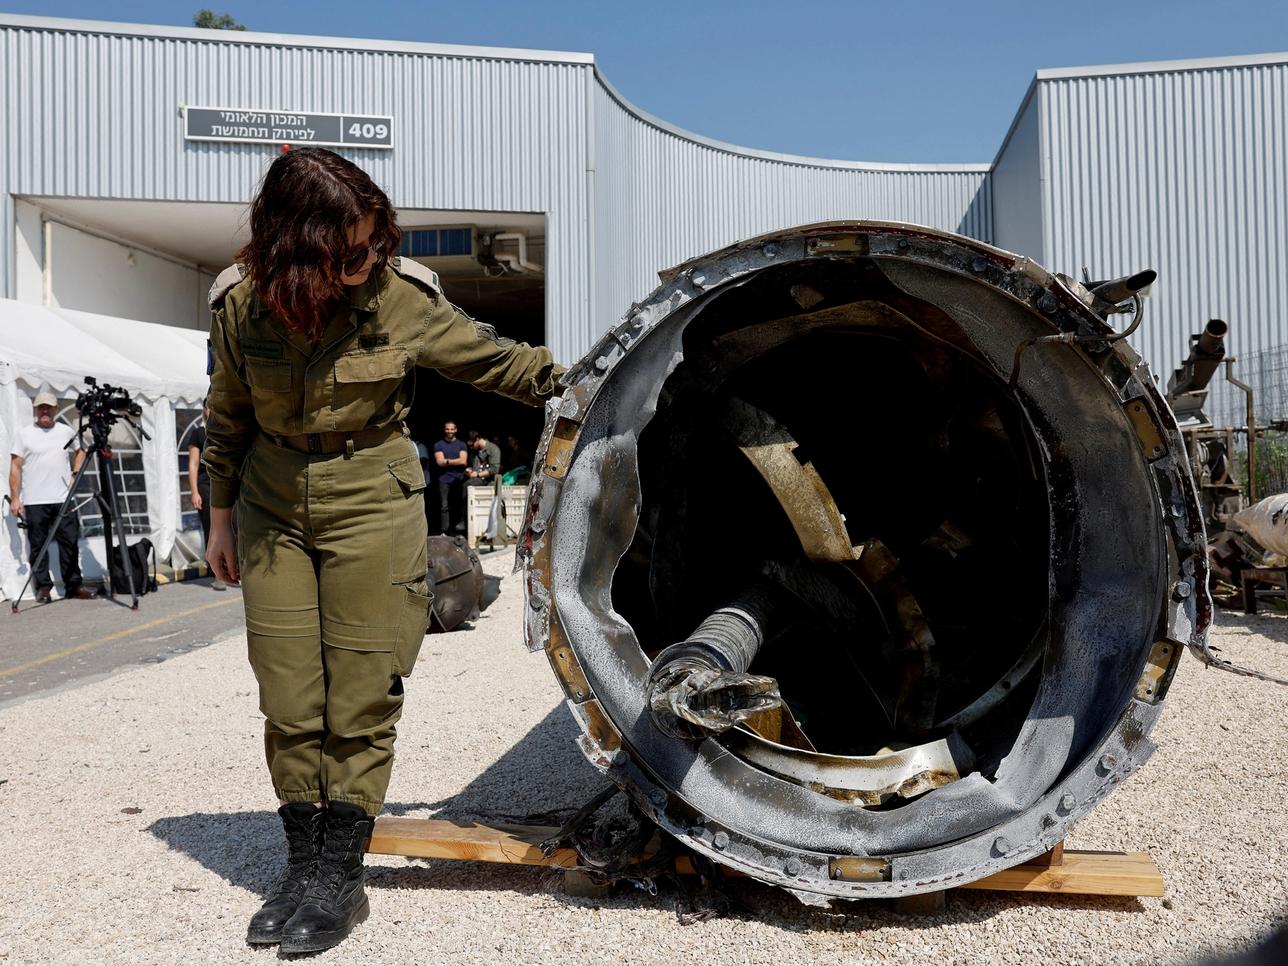 Israel's military displays what they say is an Iranian ballistic missile which they retrieved from the Dead Sea after Iran launched drones and missiles towards Israel